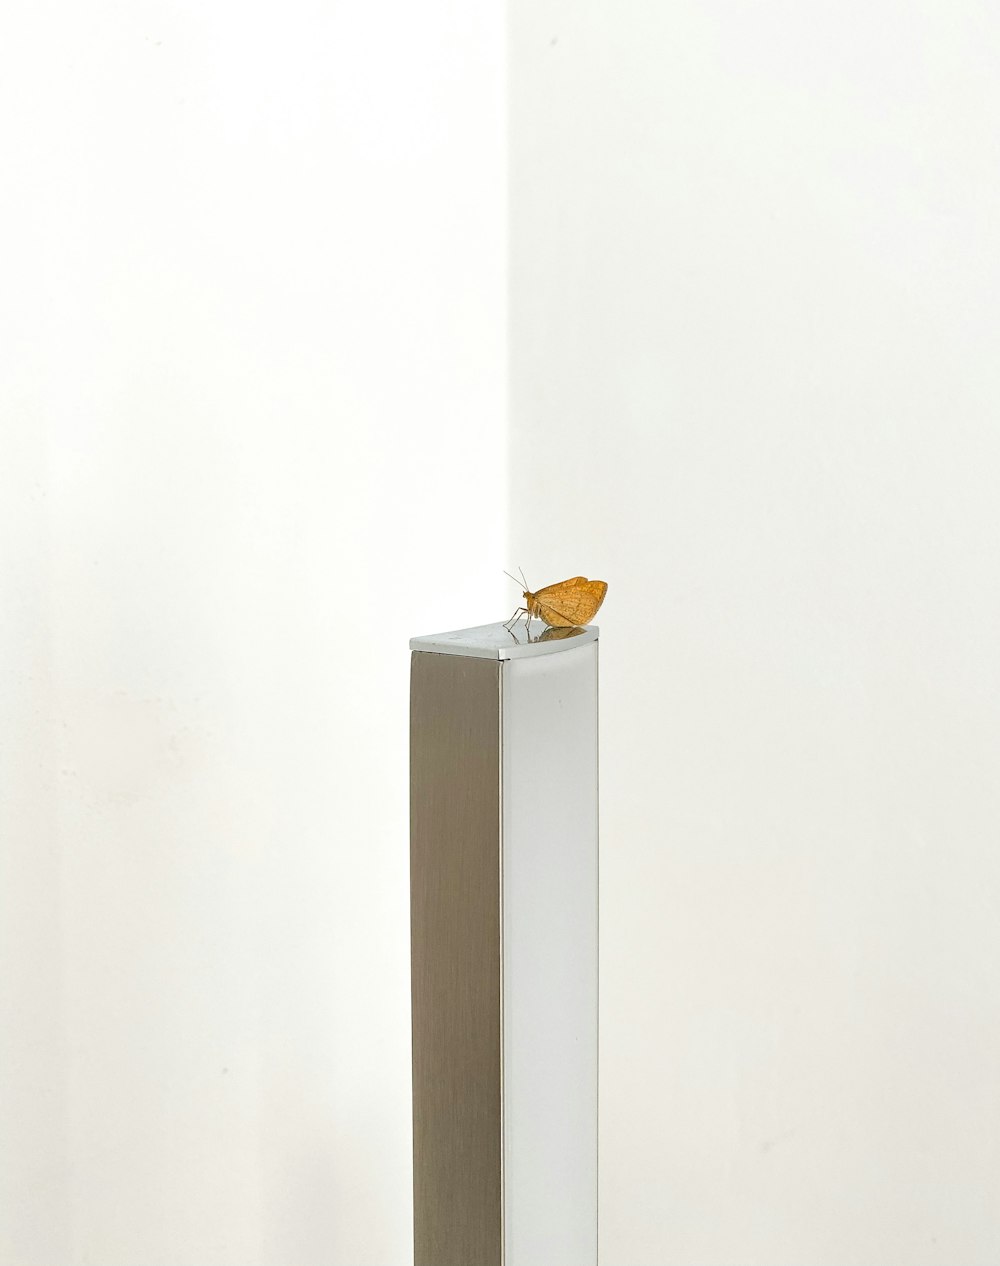 a small yellow bird sitting on top of a white pedestal